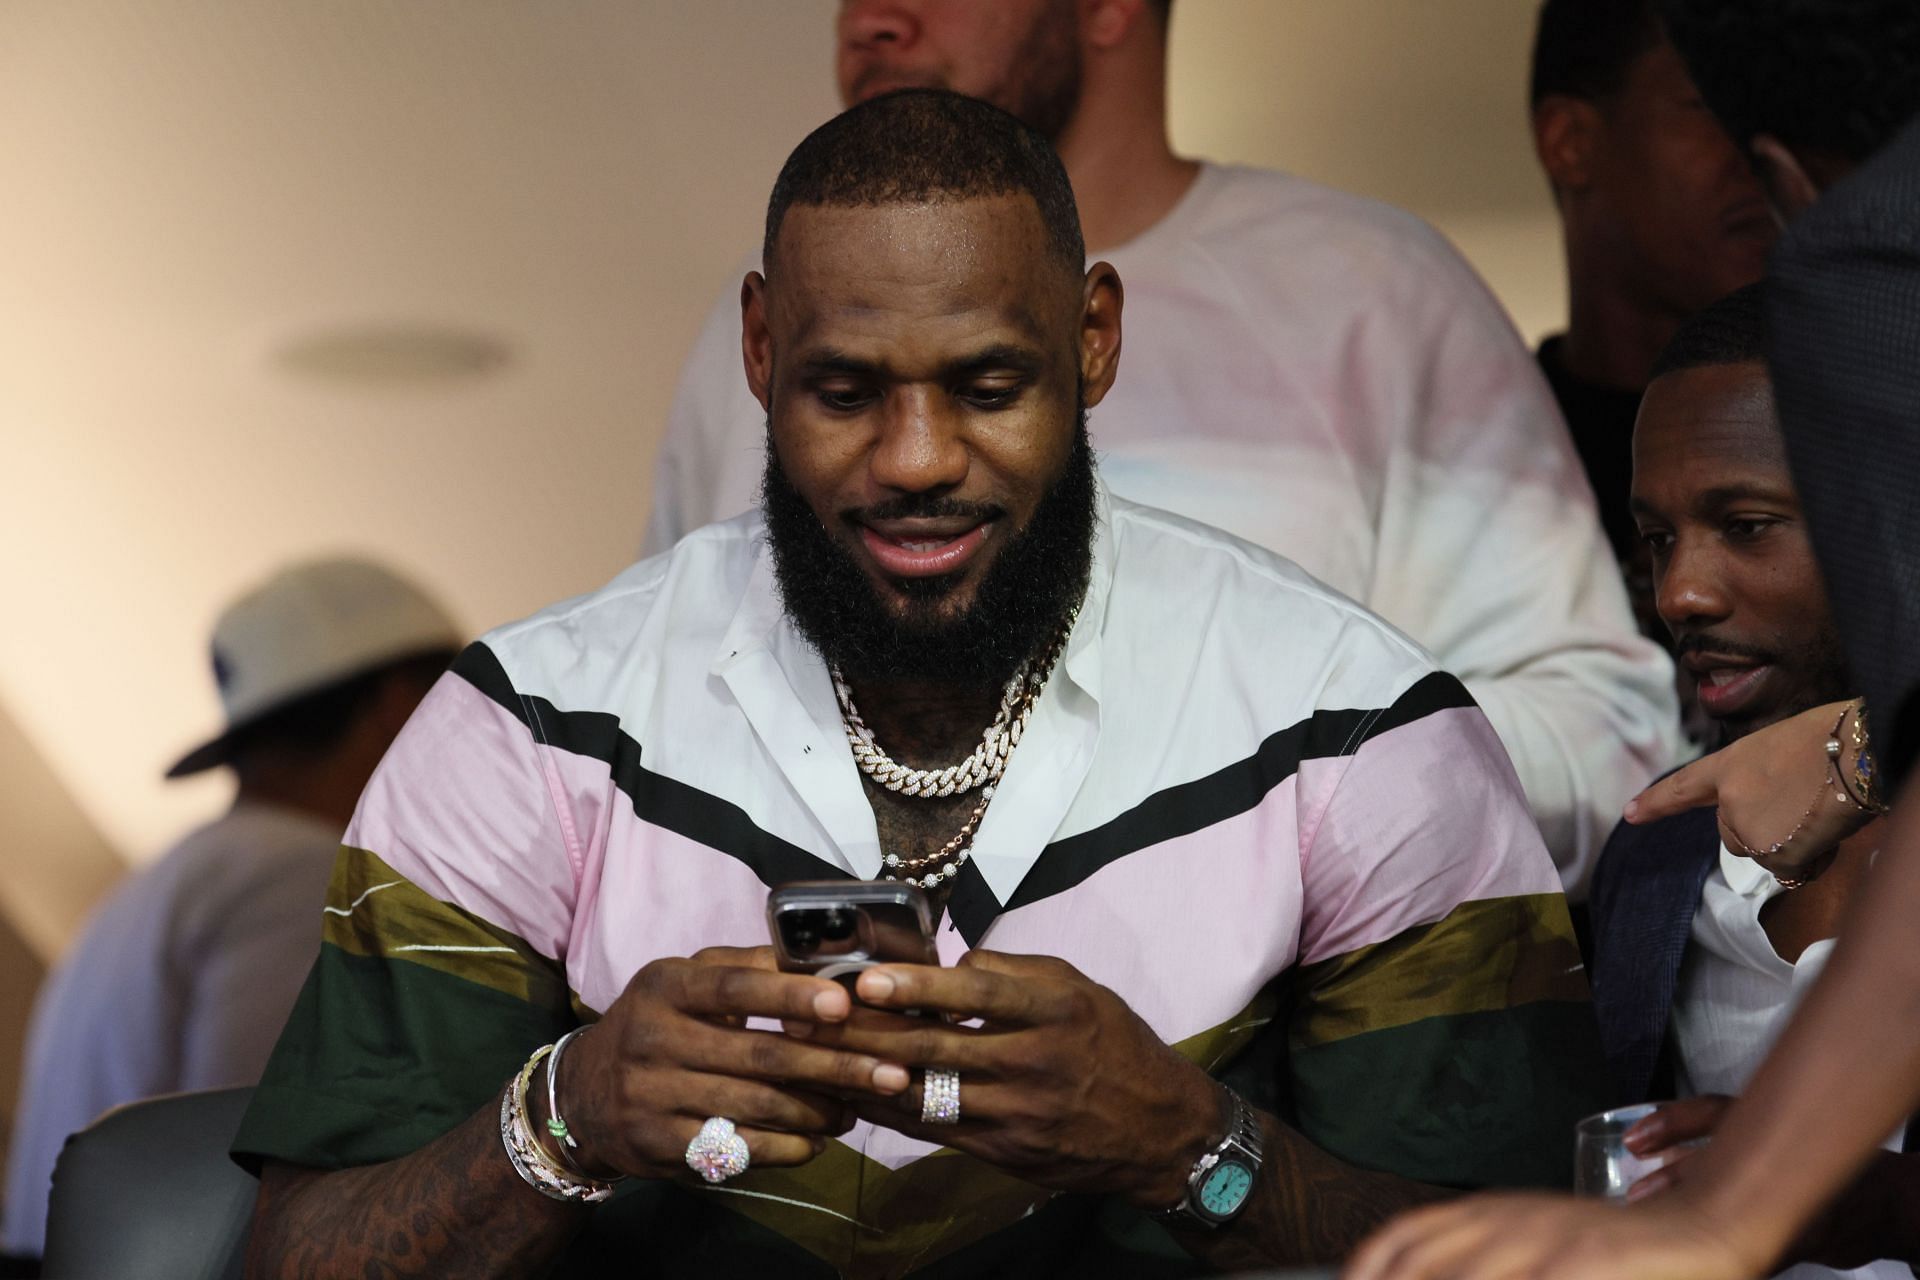 LeBron James' Vanity Fair Cover Gives Us Opulence + a Refreshing  Counter-Narrative to Stereotypes | by Maia Niguel Hoskin, Ph.D. | ZORA